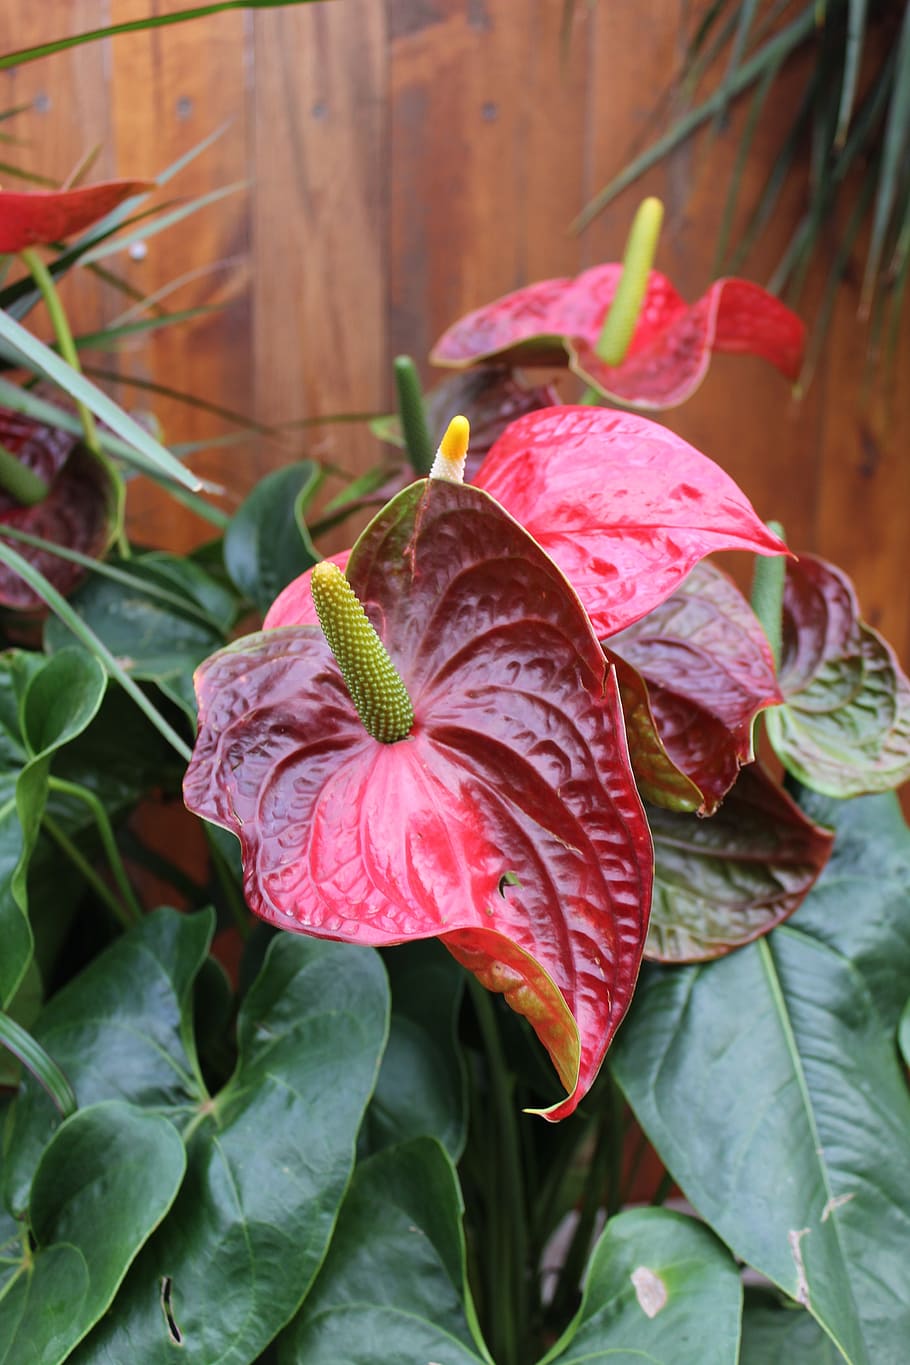 anthurium, houseplant, red, flower, bract, plant, tropical, flora, shiny, beauty in nature